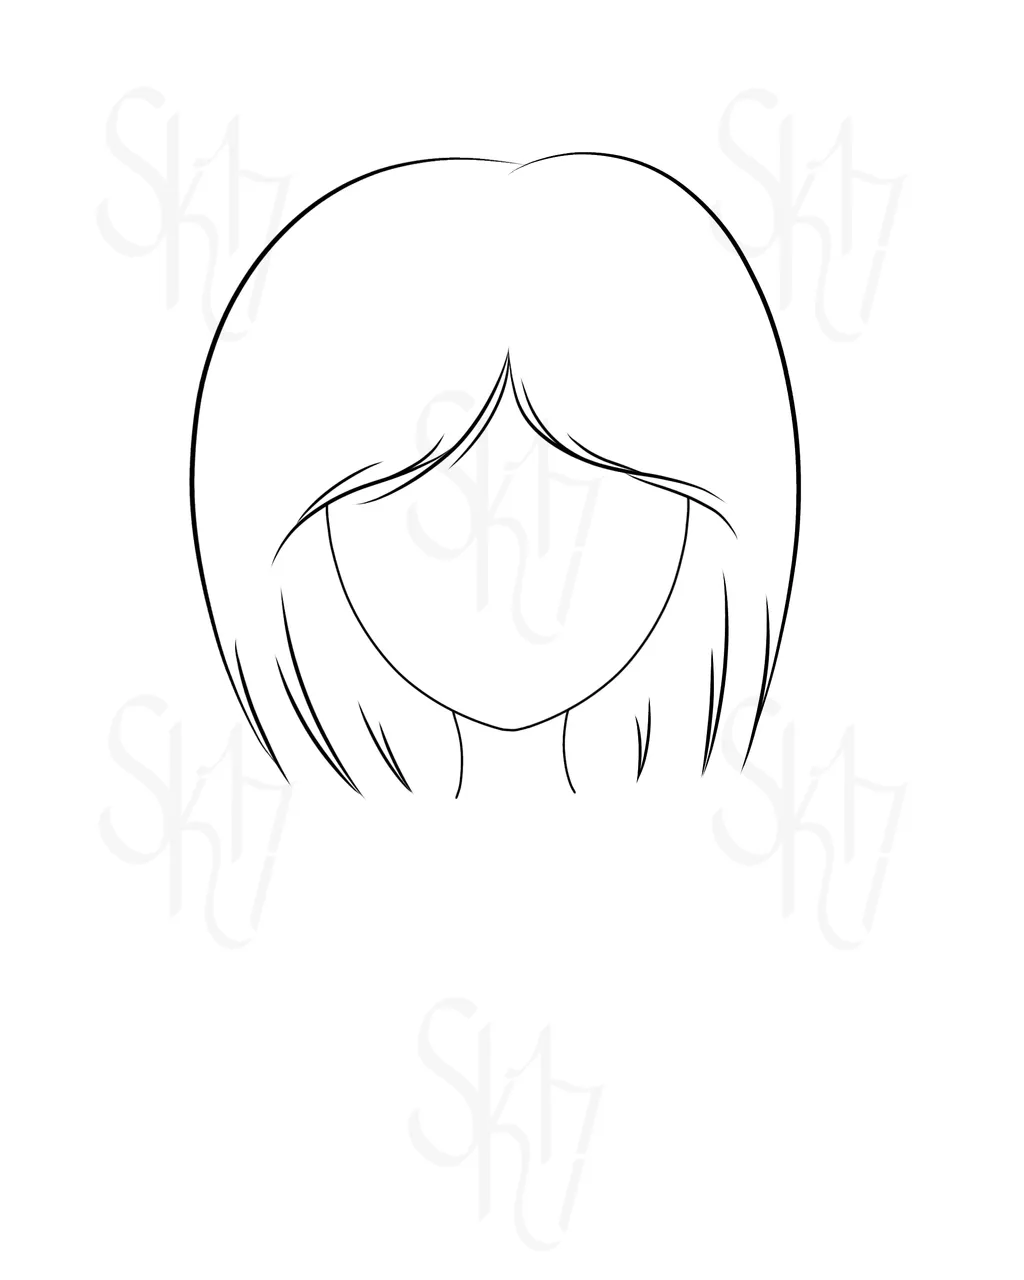 SK17_Shop ♡ Lineart.png